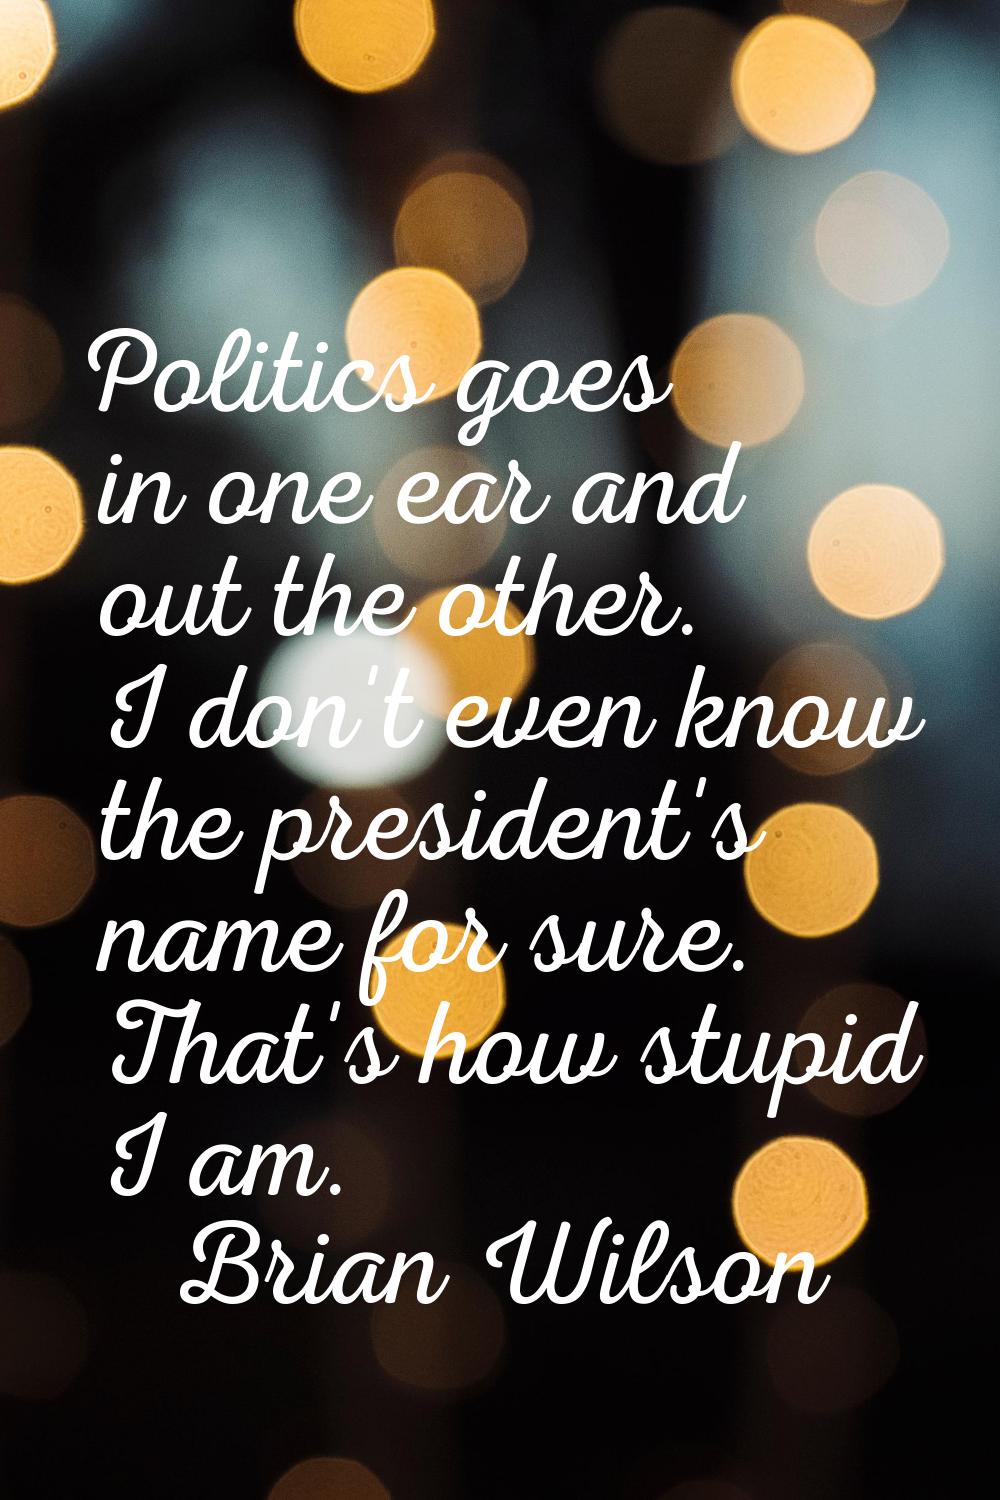 Politics goes in one ear and out the other. I don't even know the president's name for sure. That's